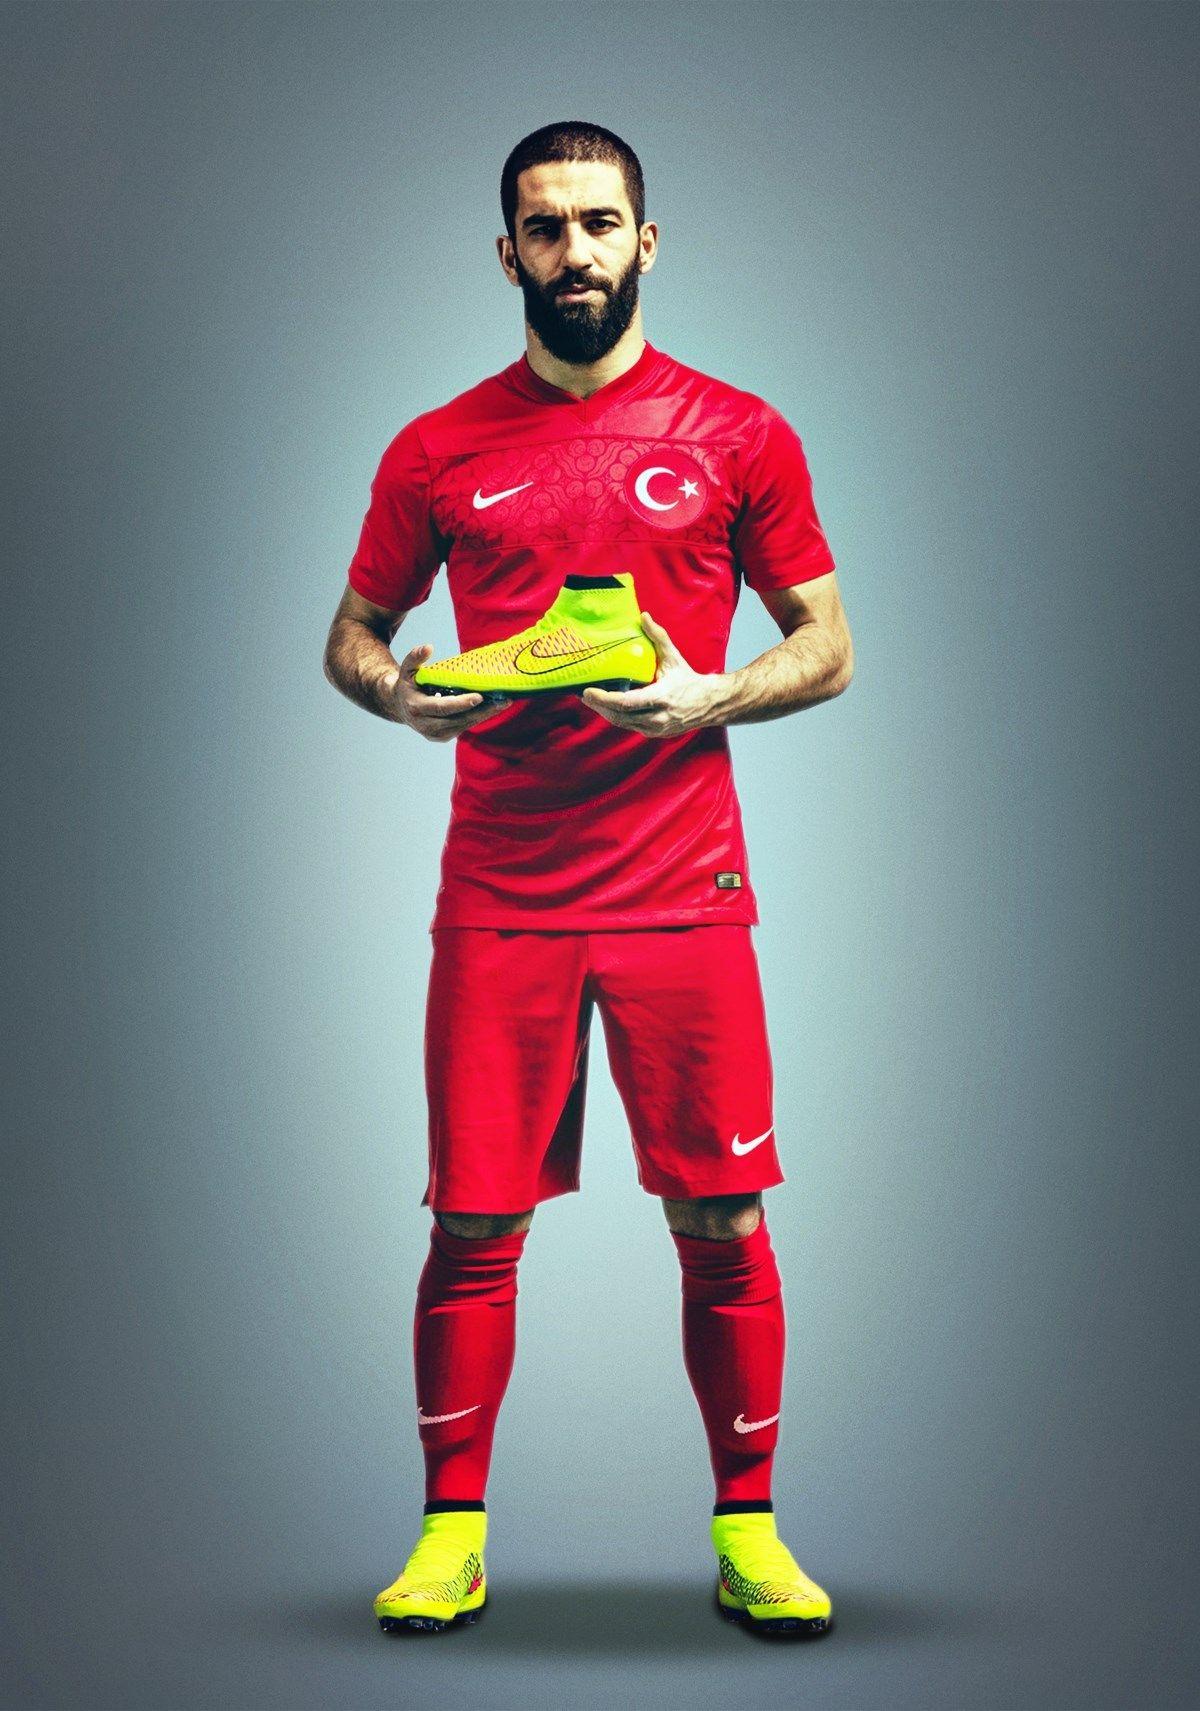 Arda Turan. Known people people news and biographies